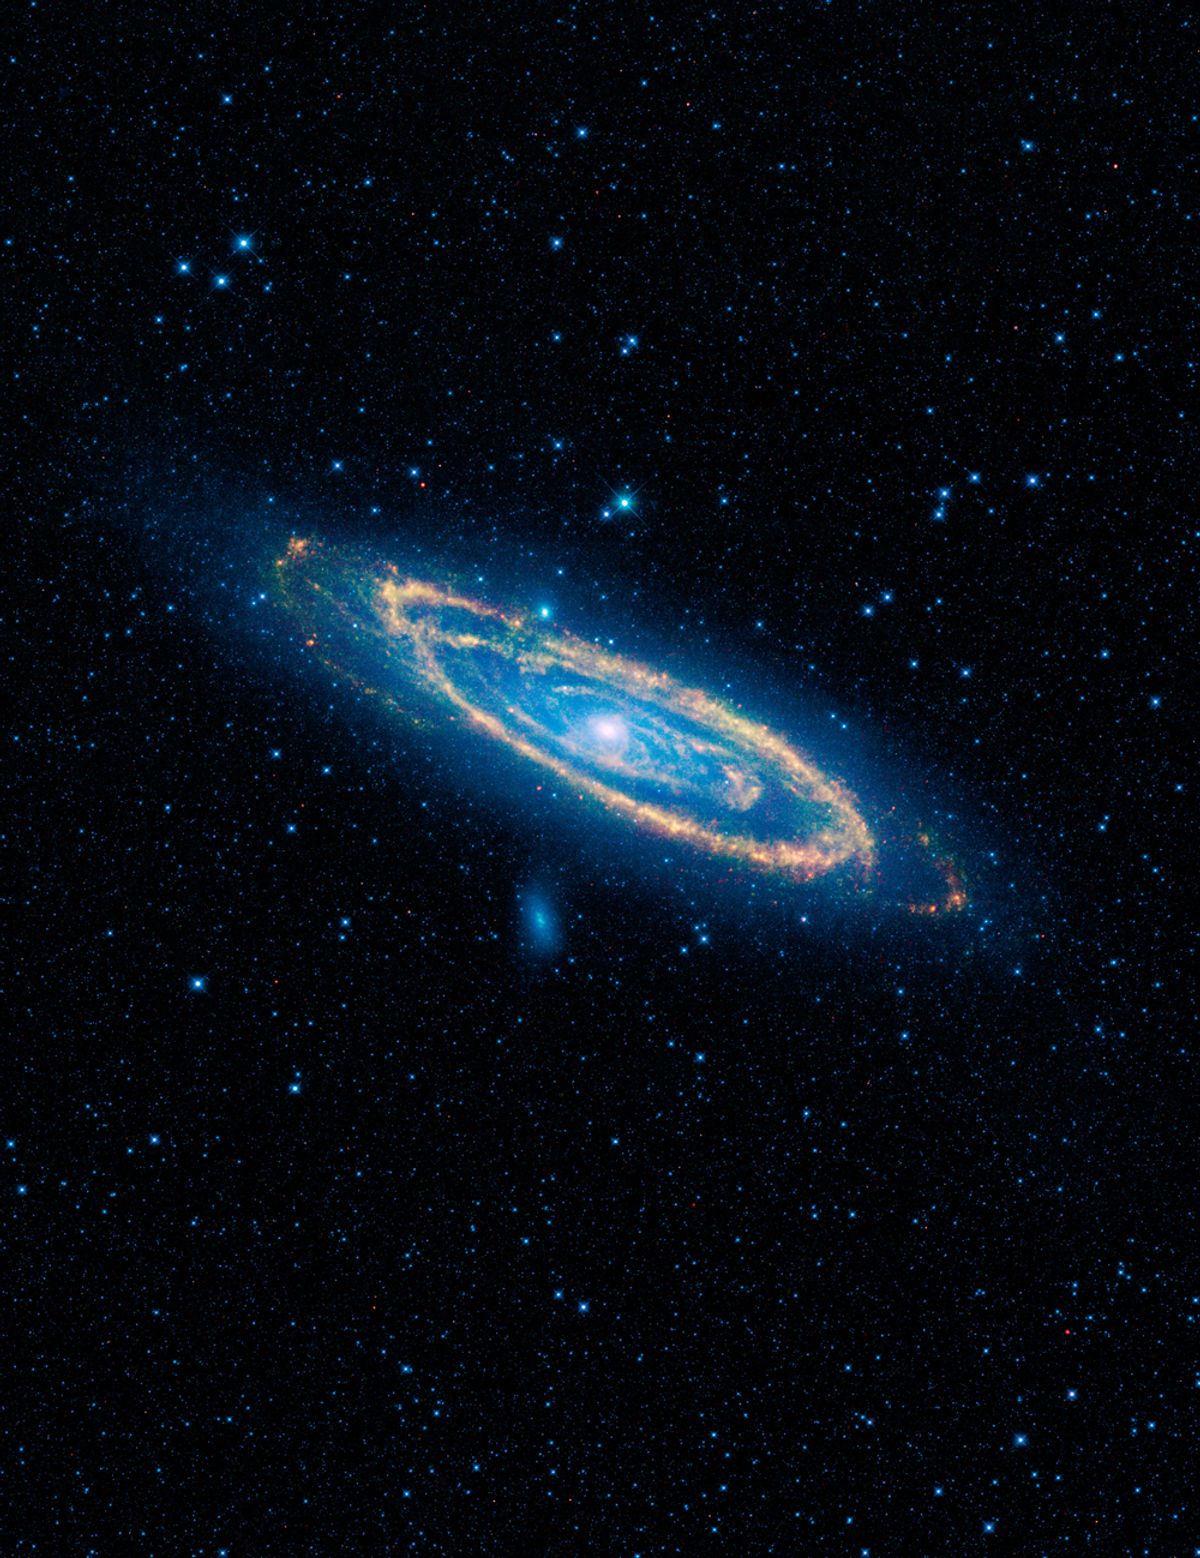 The immense Andromeda galaxy, also known as Messier 31 